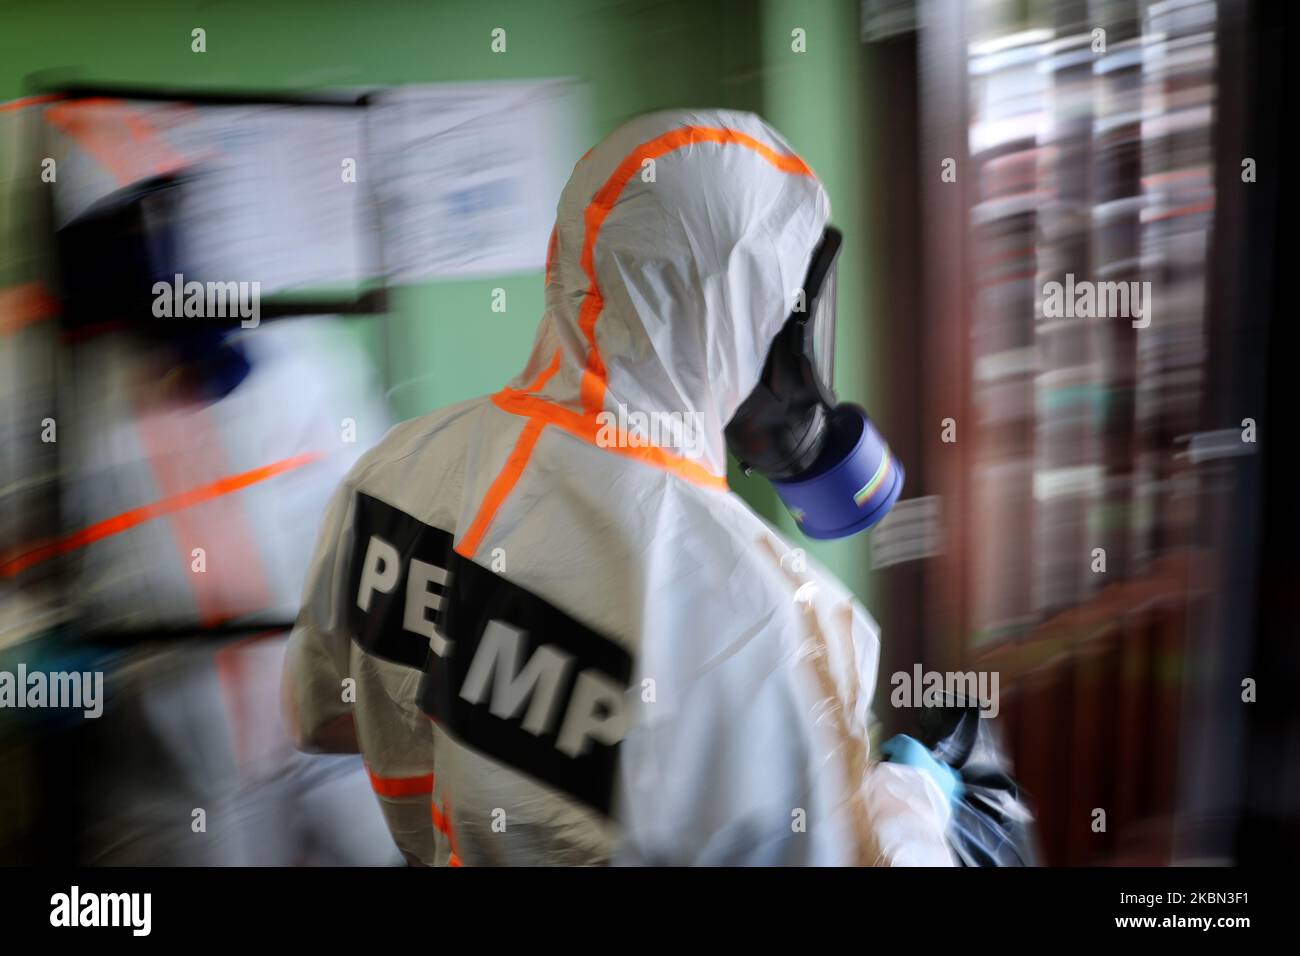 Portuguese Soldiers wearing protective gear disinfect a high school as the spread of the COVID-19 coronavirus disease continues, in Lisbon, Portugal on April 29, 2020. As Portugal's state of emergency will end on May 2 and the Government expected to reopen high schools in mid-May, more than 400 members of the country's armed forces are carrying out the disinfection of schools. (Photo by Pedro FiÃºza/NurPhoto) Stock Photo